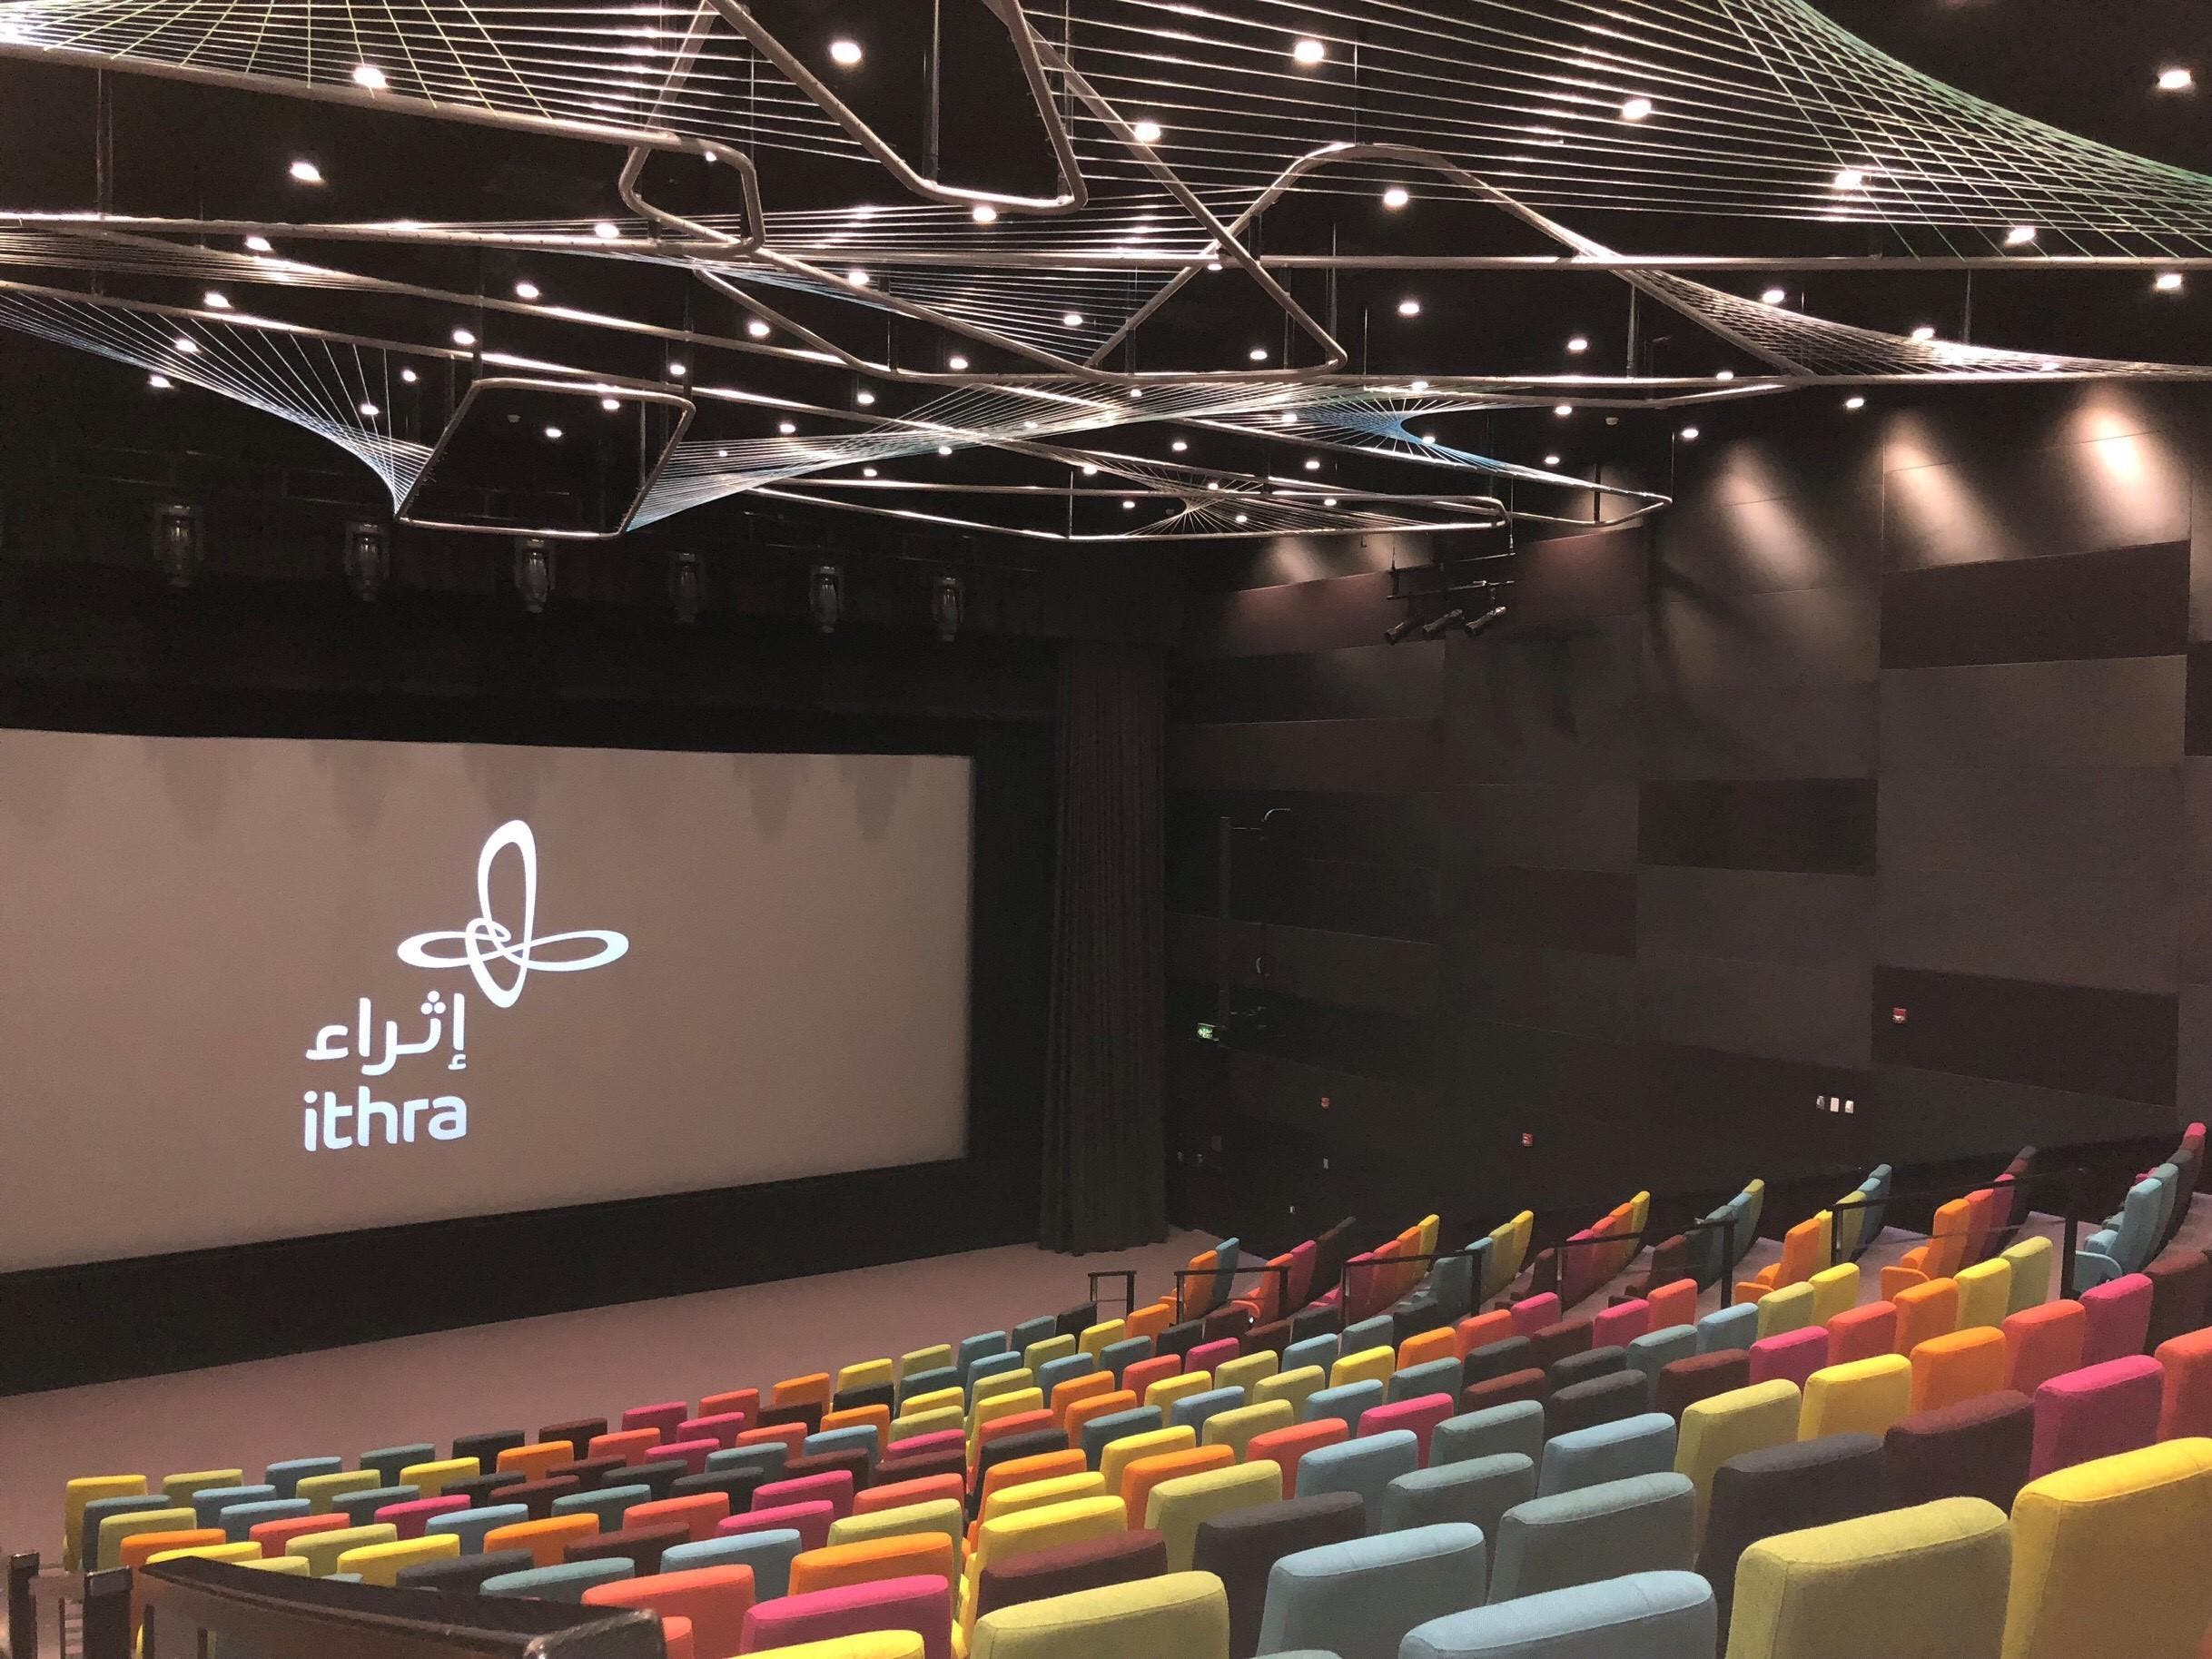 The cinema at the King Abdulaziz World Cultural Center (Ithra). (Supplied)